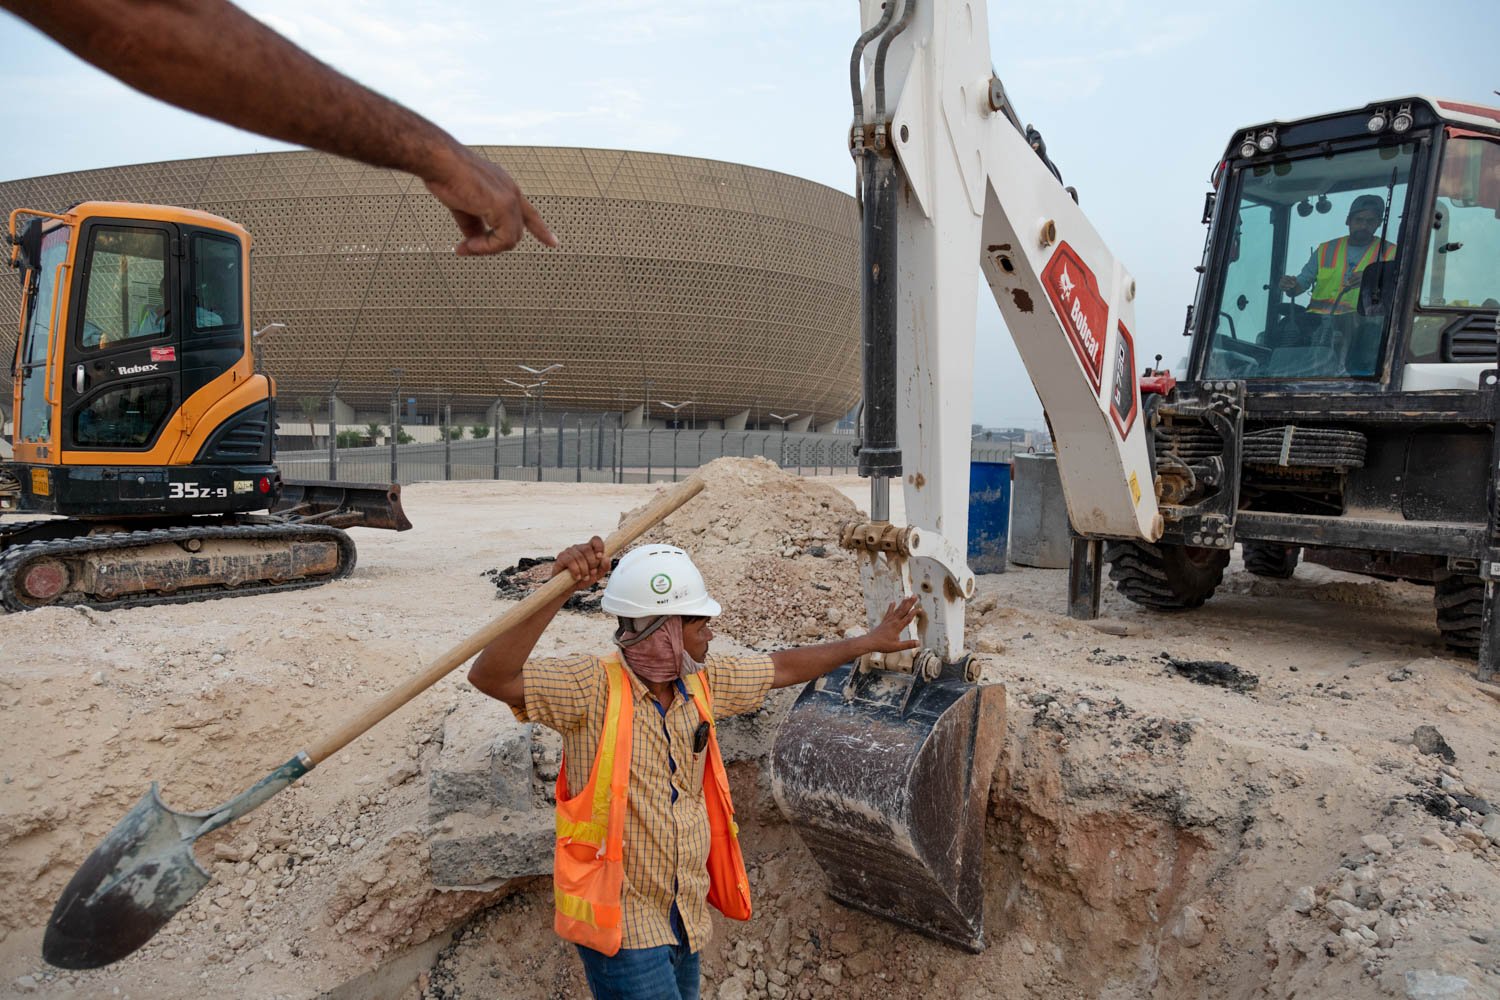  Workers put the finishing touches on the surrounding landscape of the main World Cup stadium in the Lusail area of Doha, Qatar on August 17, 2022. 